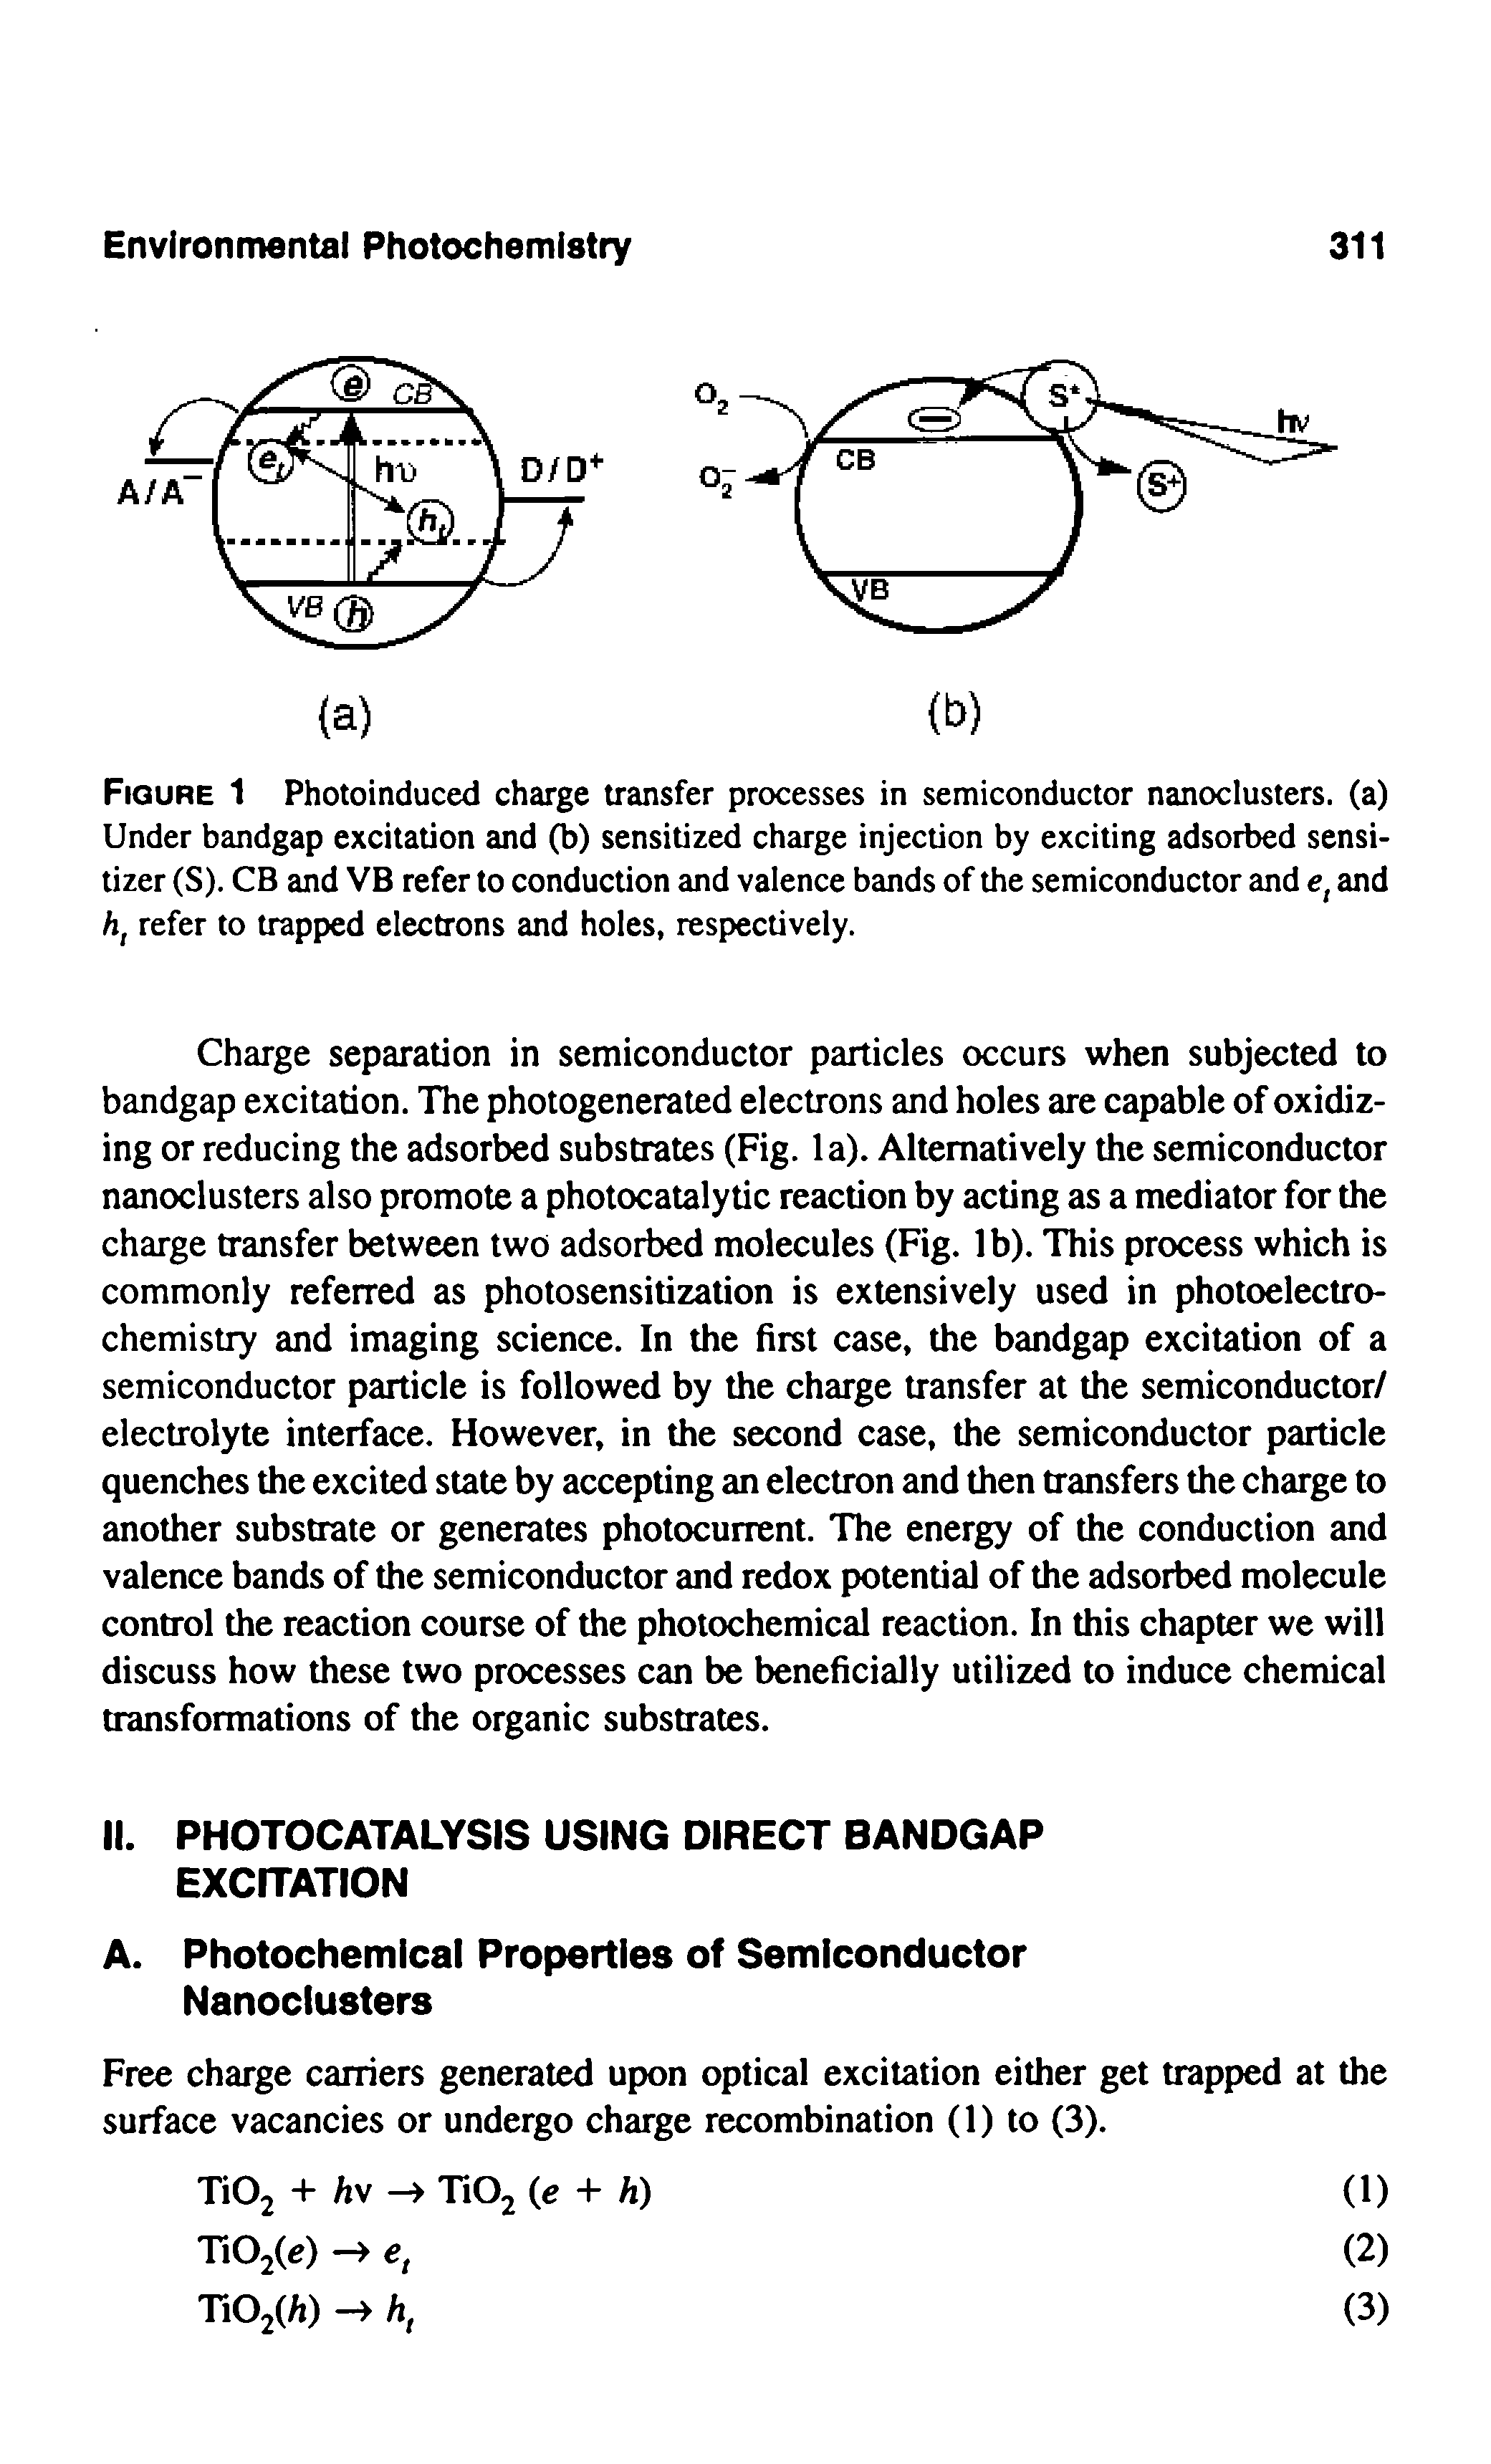 Figure 1 Photoinduced charge transfer processes in semiconductor nanoclusters, (a) Under bandgap excitation and (b) sensitized charge injection by exciting adsorbed sensitizer (S). CB and VB refer to conduction and valence bands of the semiconductor and et and ht refer to trapped electrons and holes, respectively.